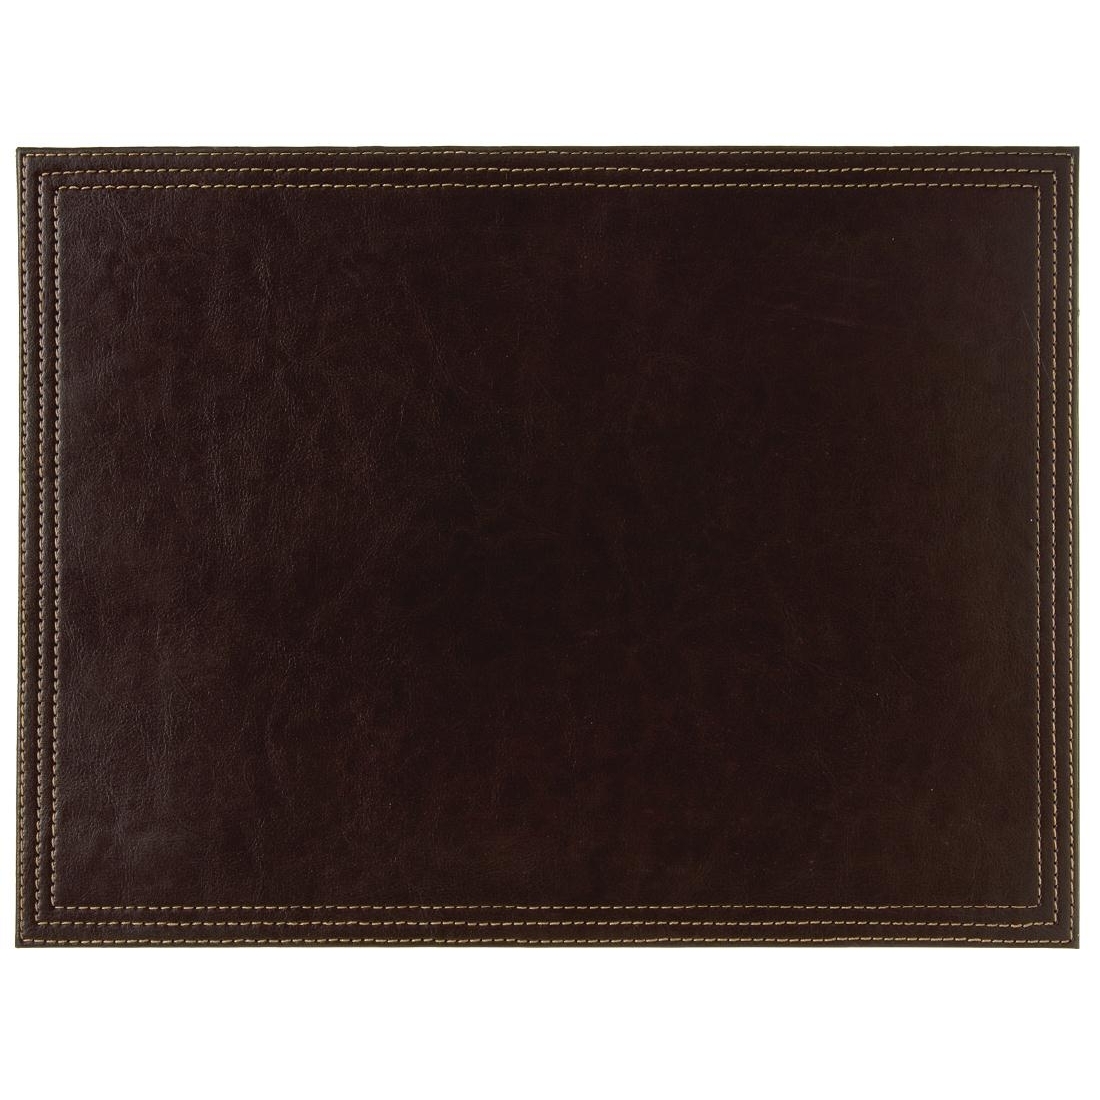 ce298-brown-placemat